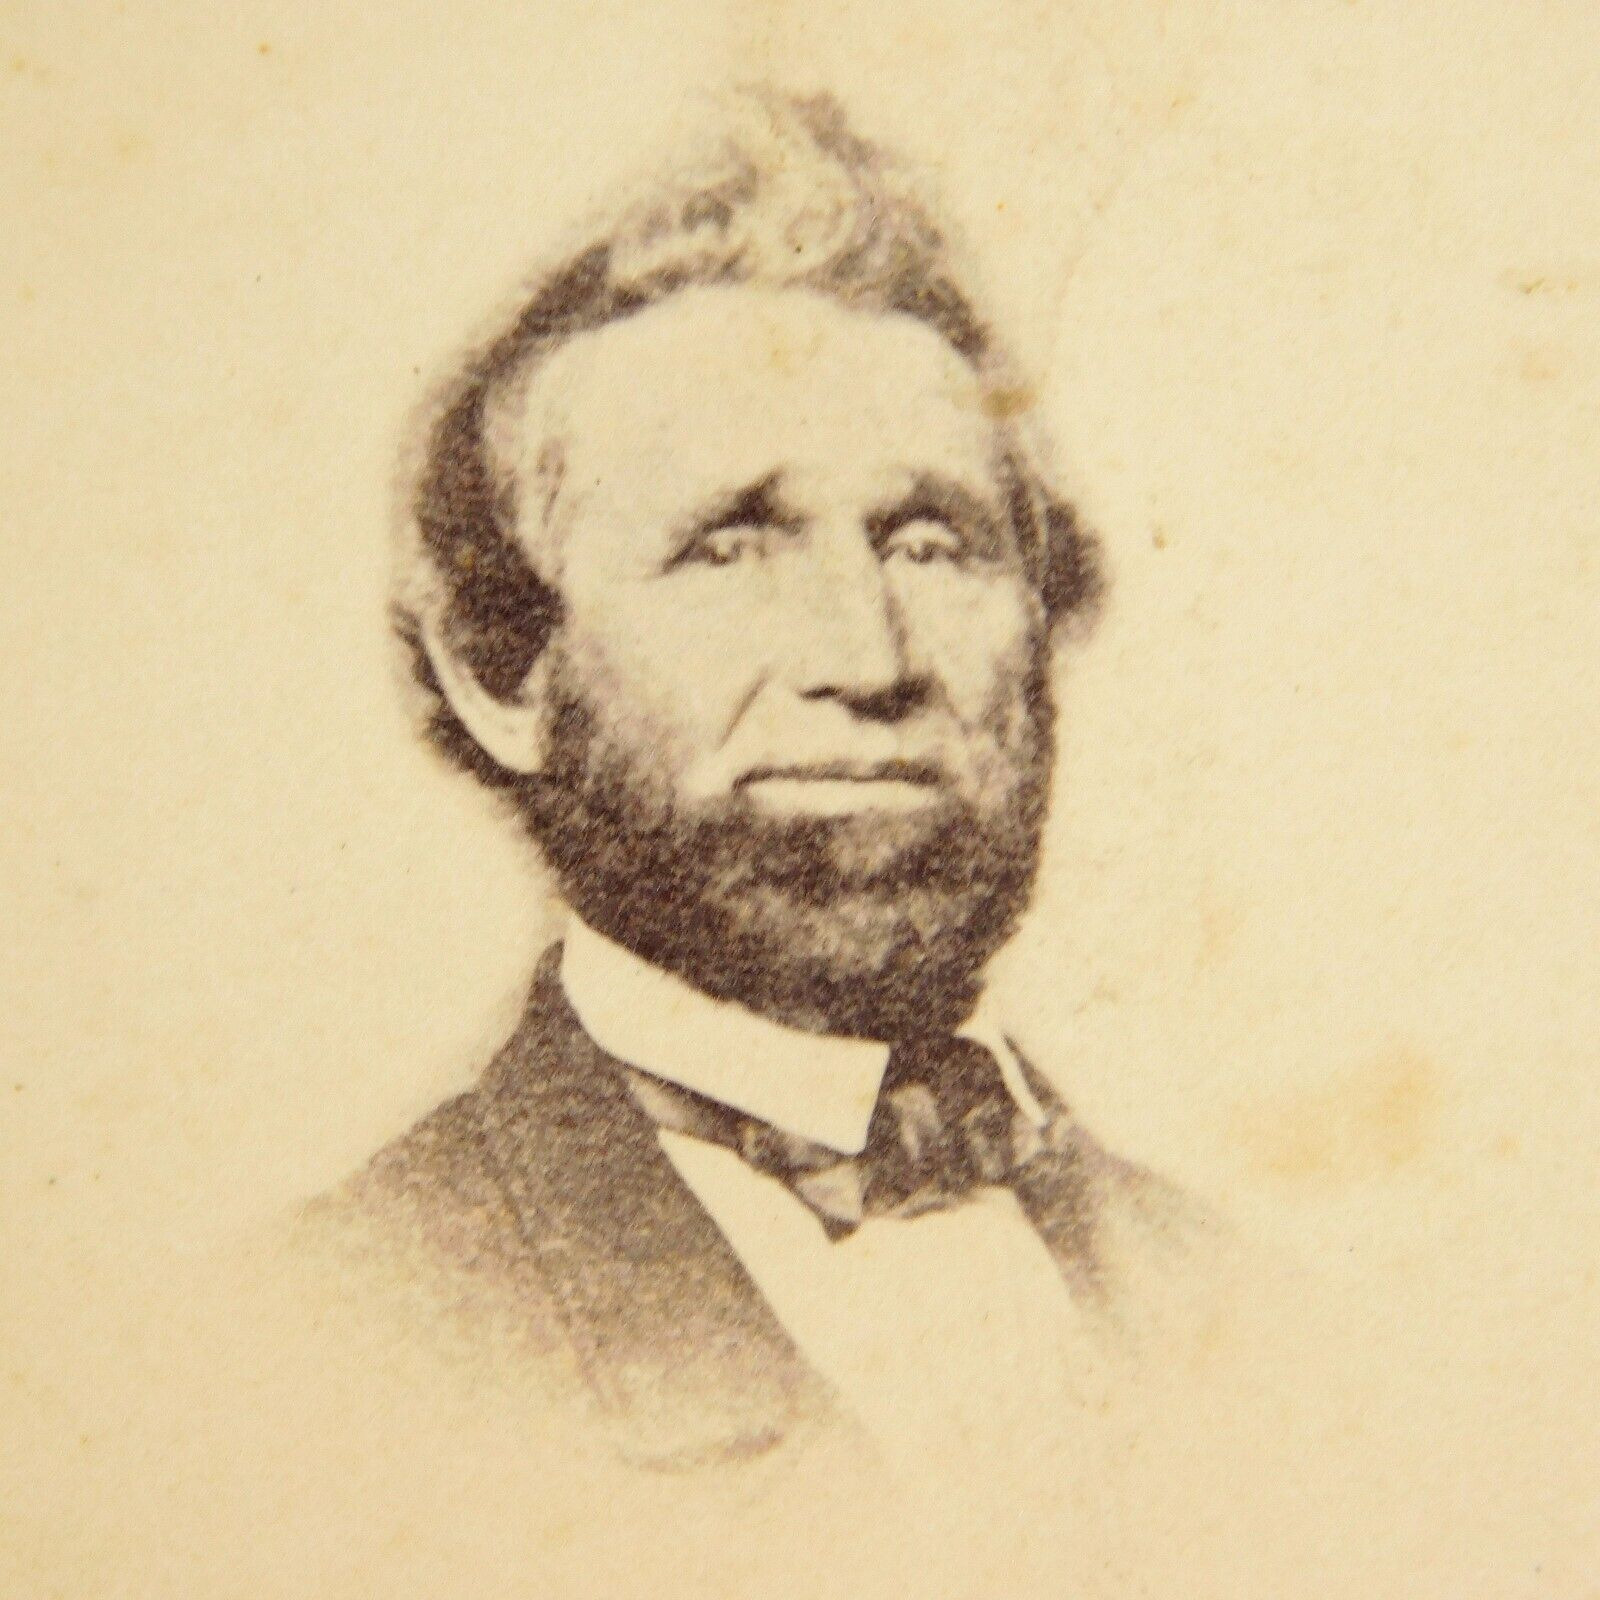 Antique Photo CDV Gentleman, Western Go to meeting Tie, Beard and spiked hair